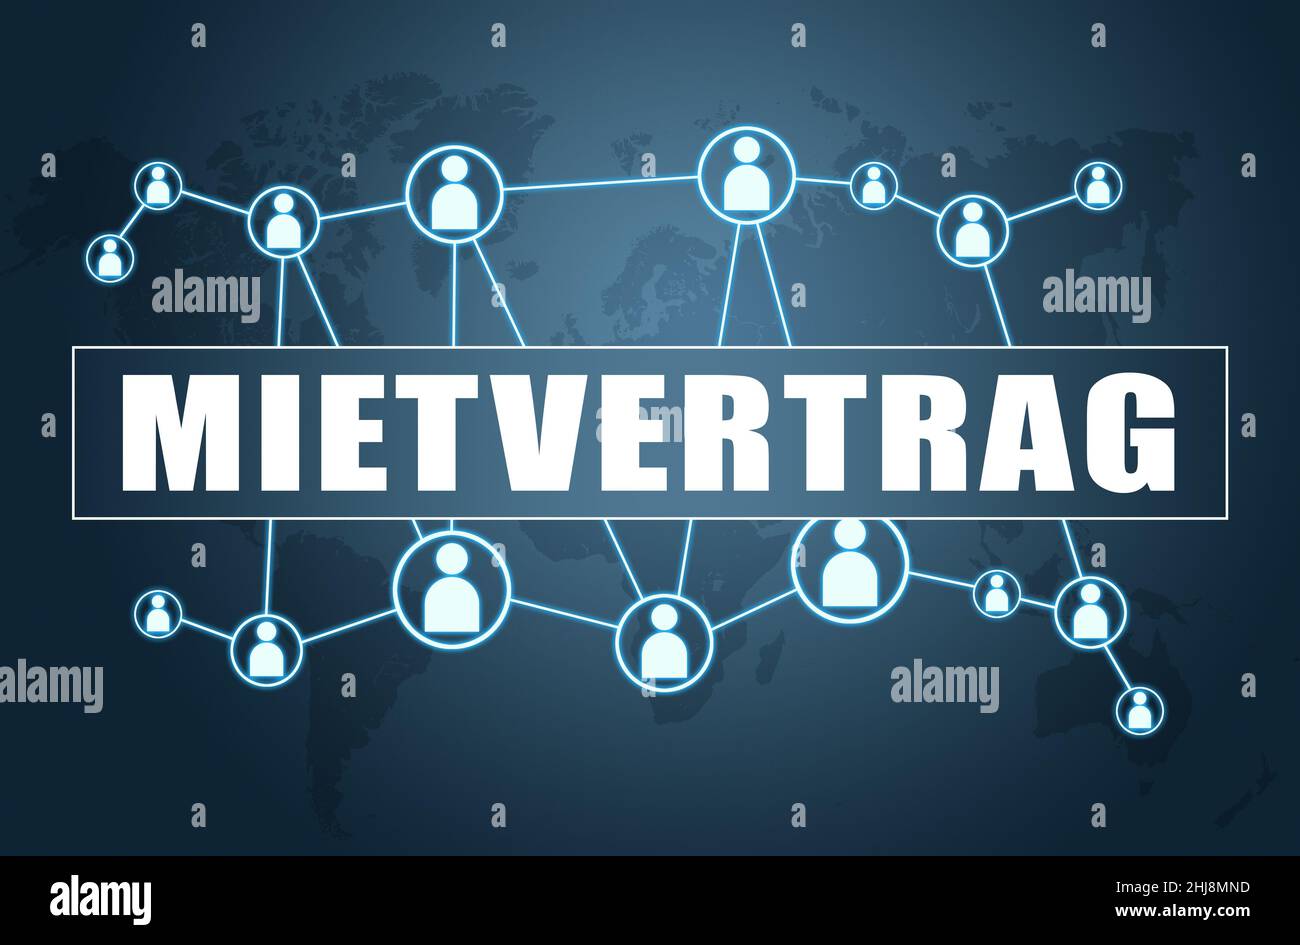 Mietvertrag - german word for rent contract or lease agreement - text concept on blue background with world map and social icons. Stock Photo